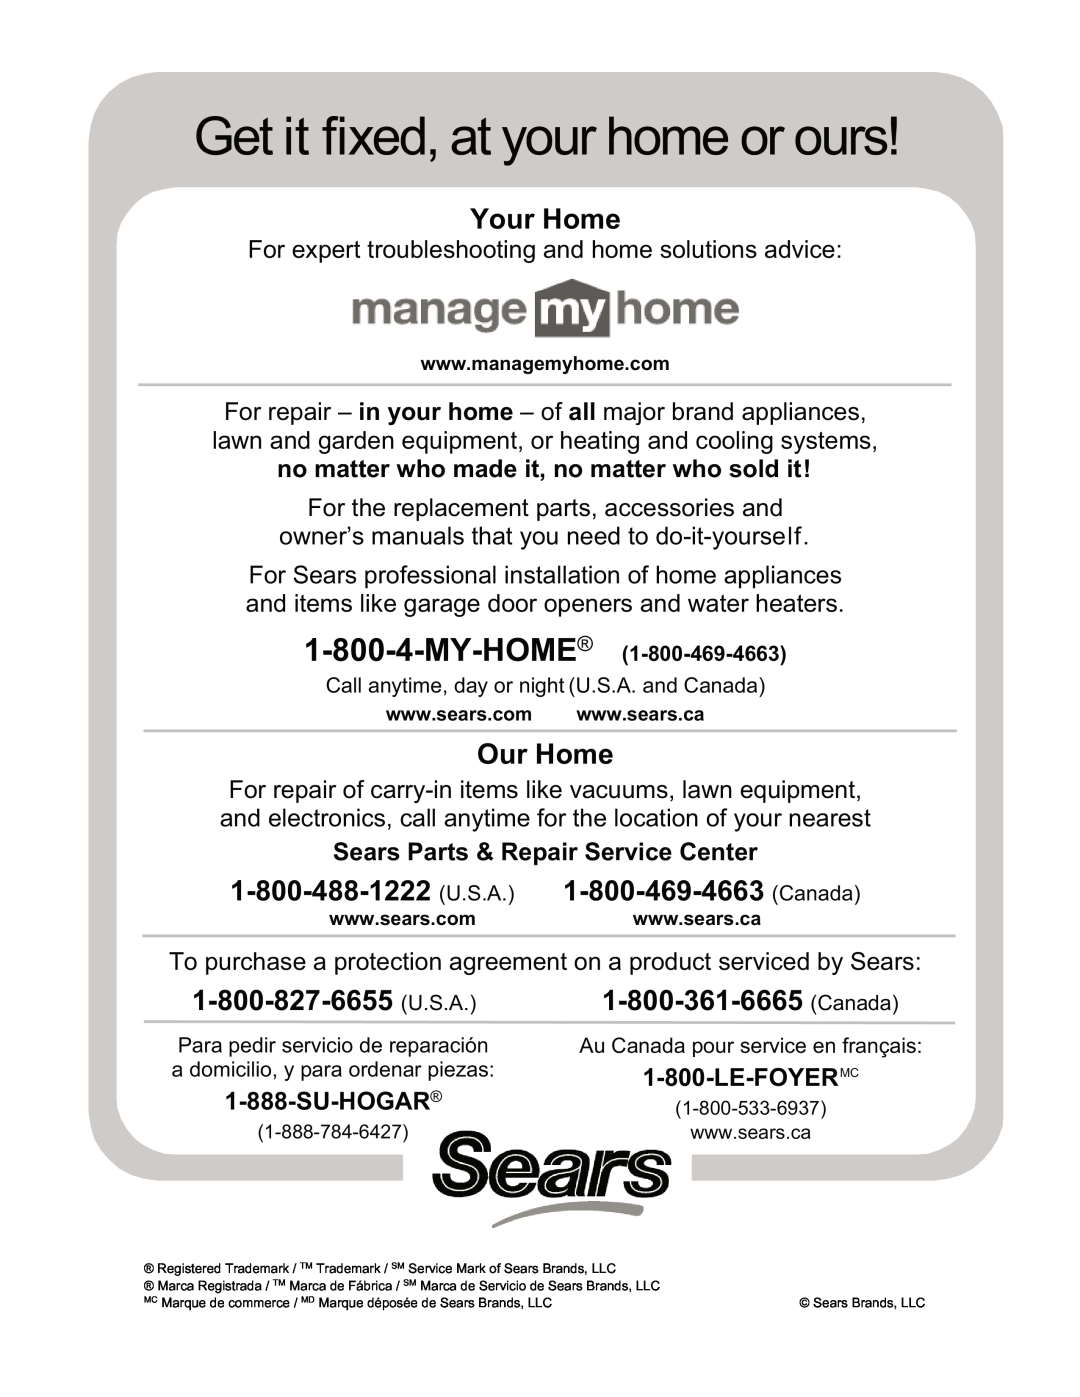 Kenmore 125.15884801 Get it fixed, at your home or ours, Your Home, Our Home, Sears Parts & Repair Service Center 